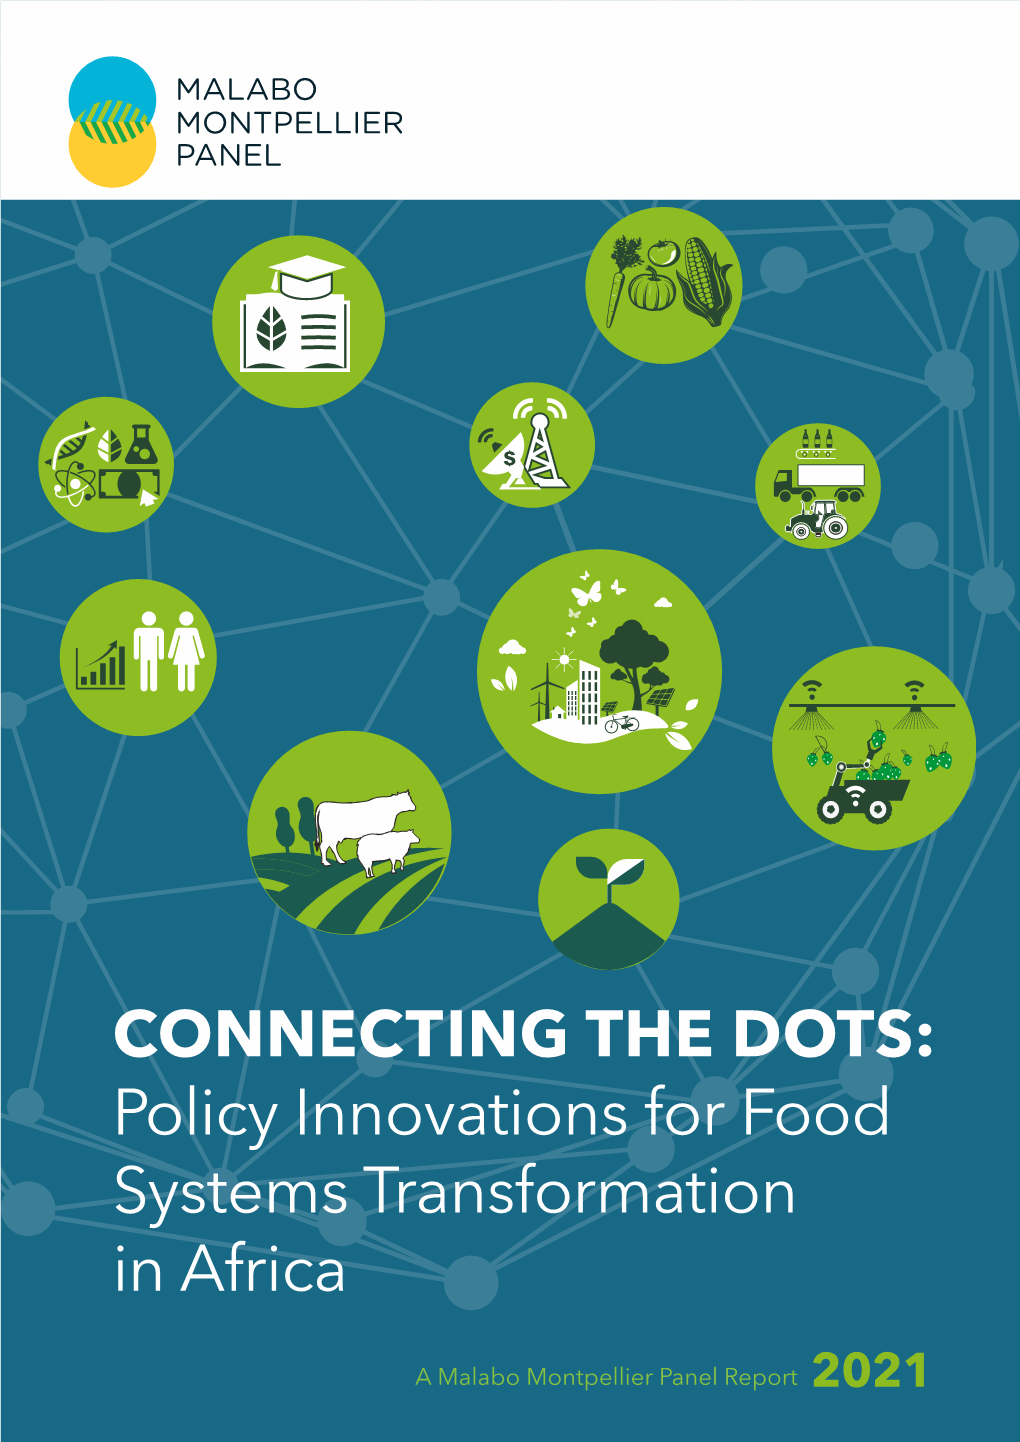 Policy Innovations for Food Systems Transformation in Africa